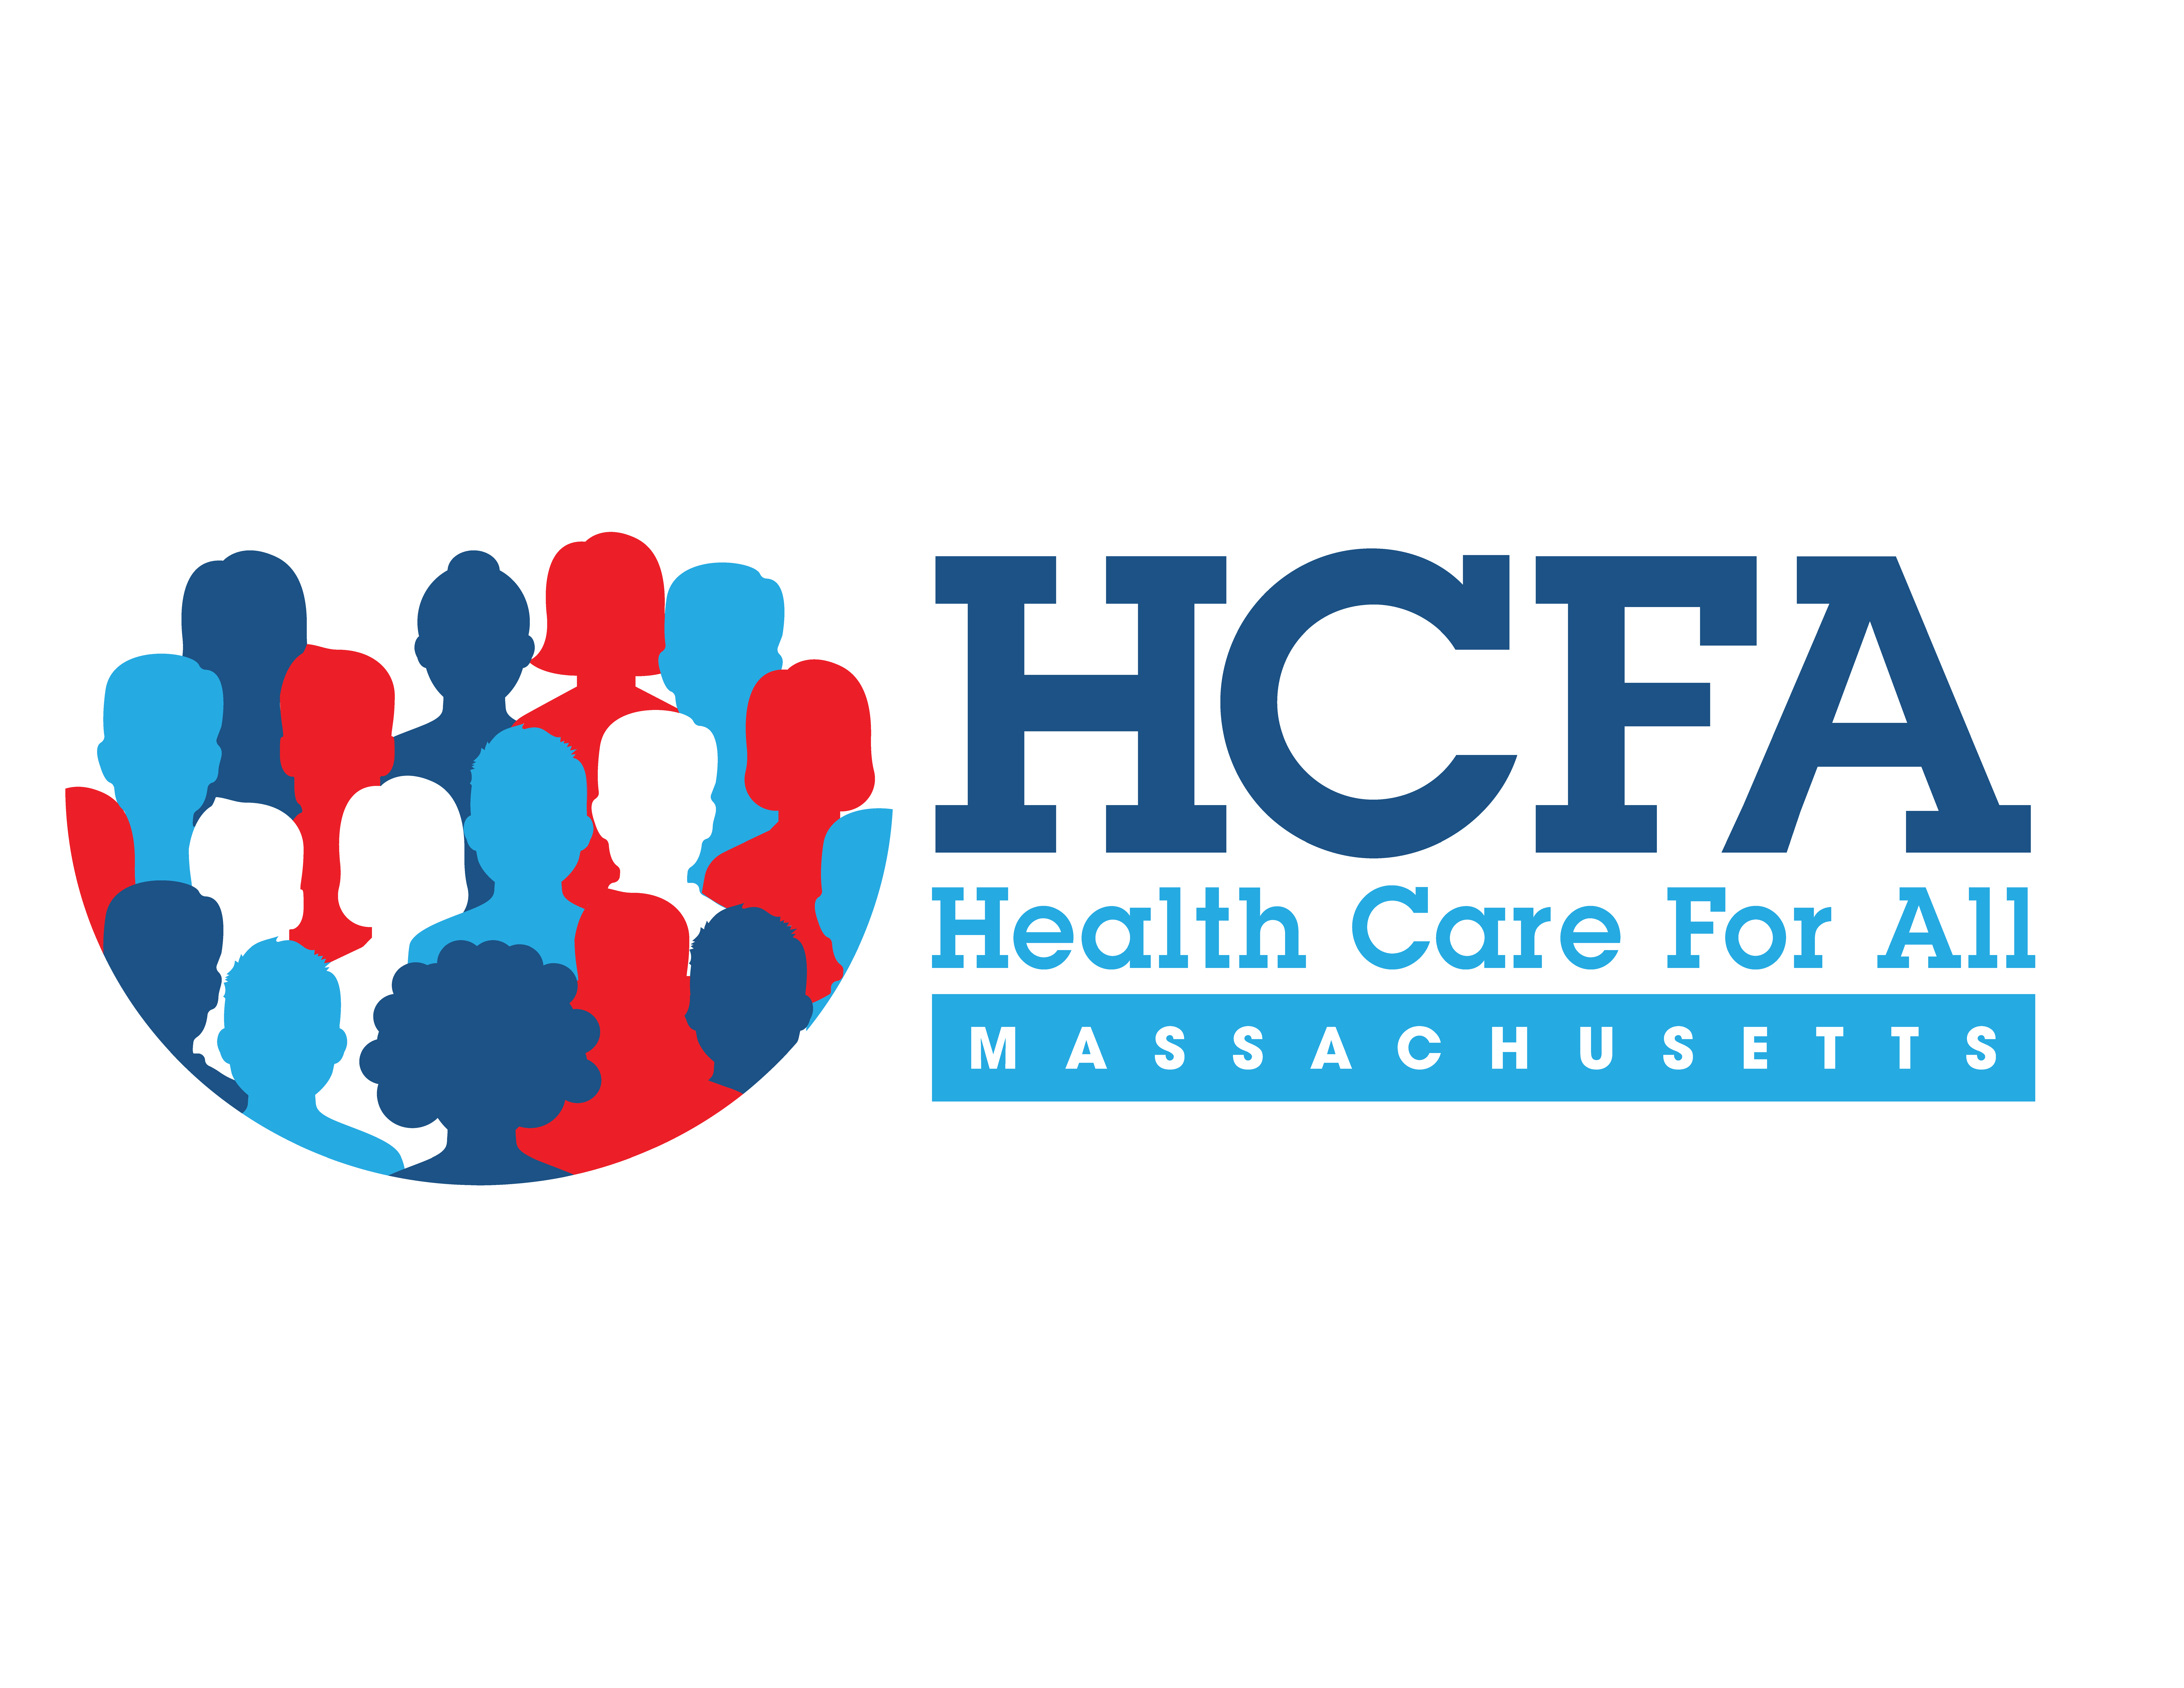 PRESS STATEMENT: Health Care For All Commends Massachusetts Leadership for Passing the Mental Health Bill